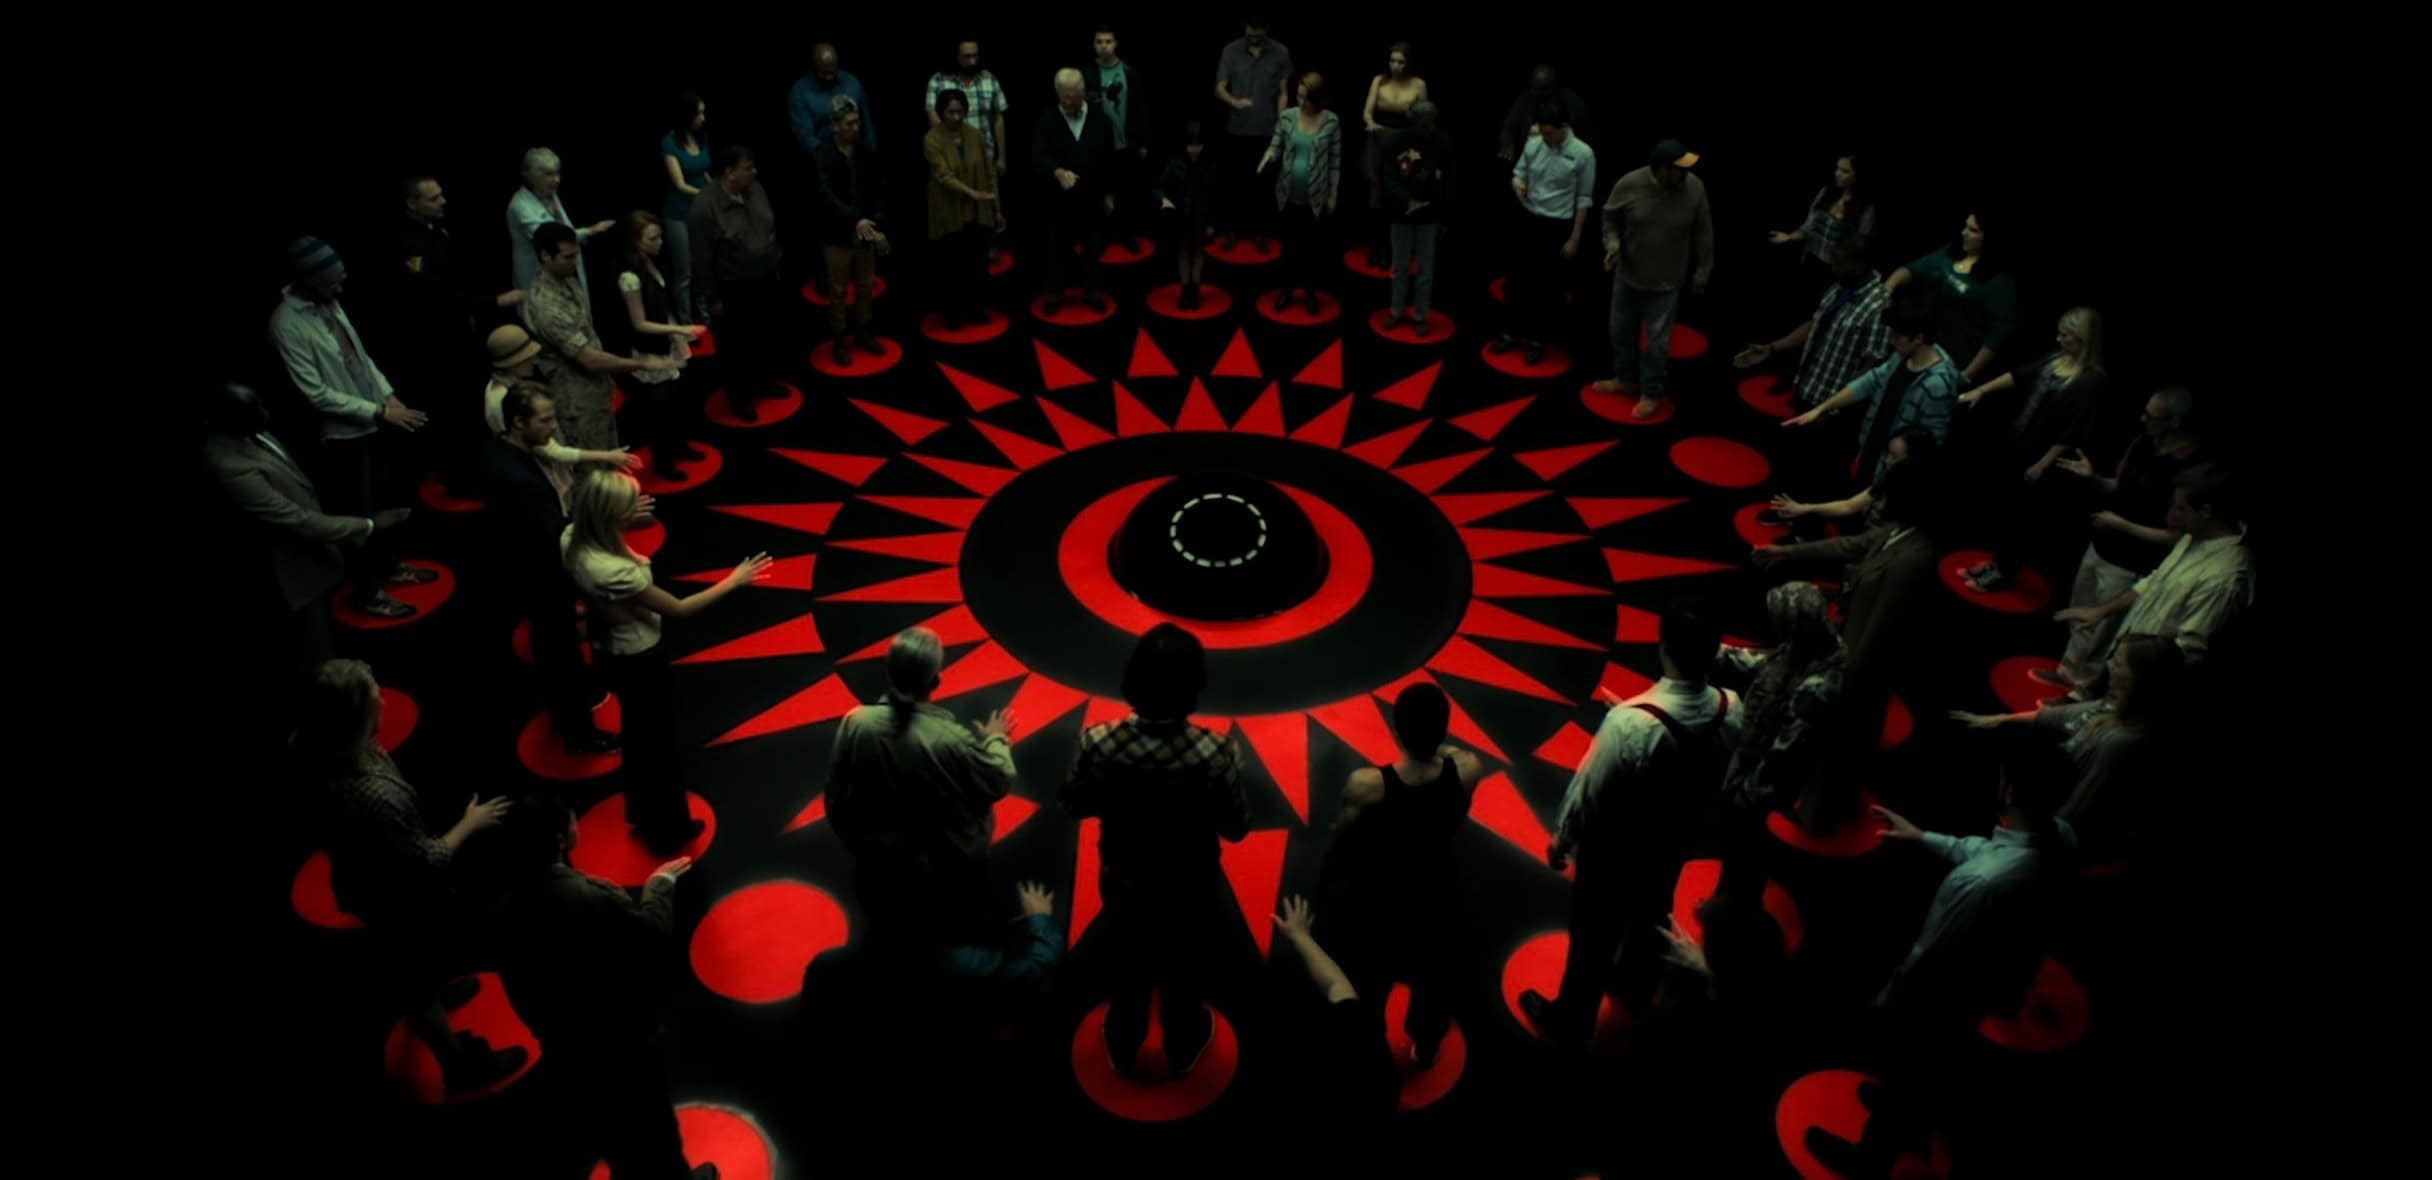 Circles: 2015 sci-fi thriller Circle is getting a sequel